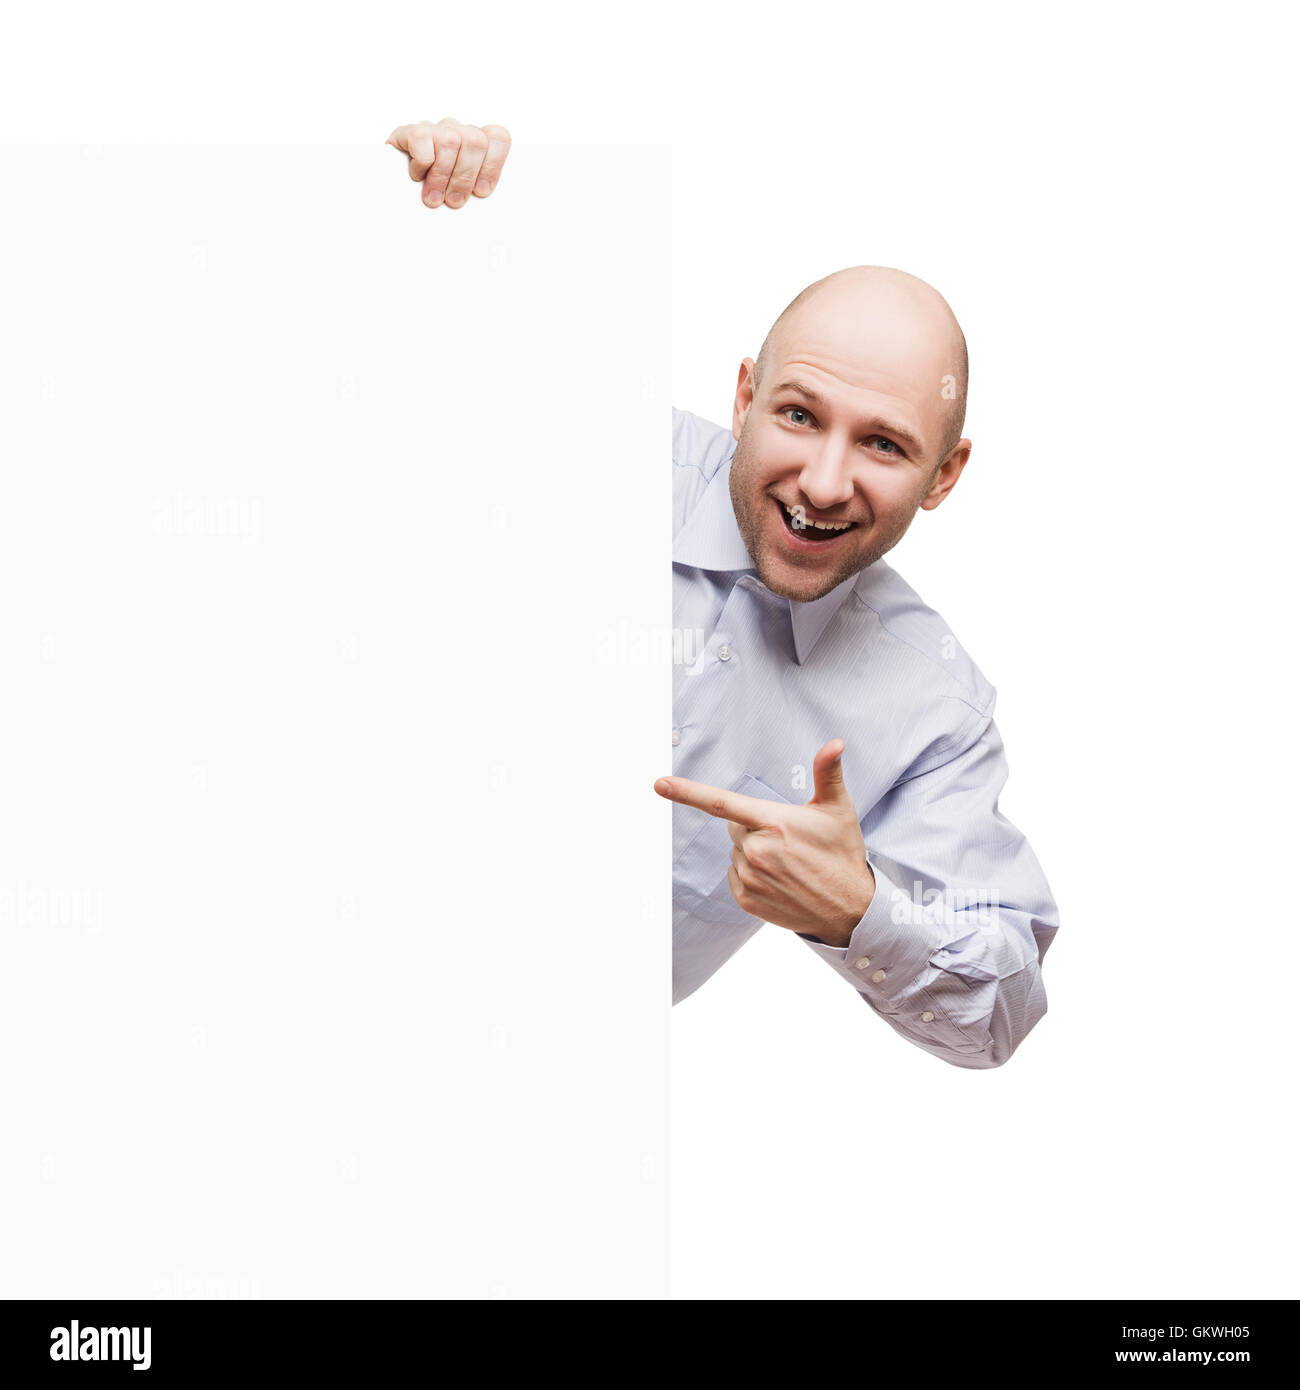 Man holding blank sign or placard Stock Photo